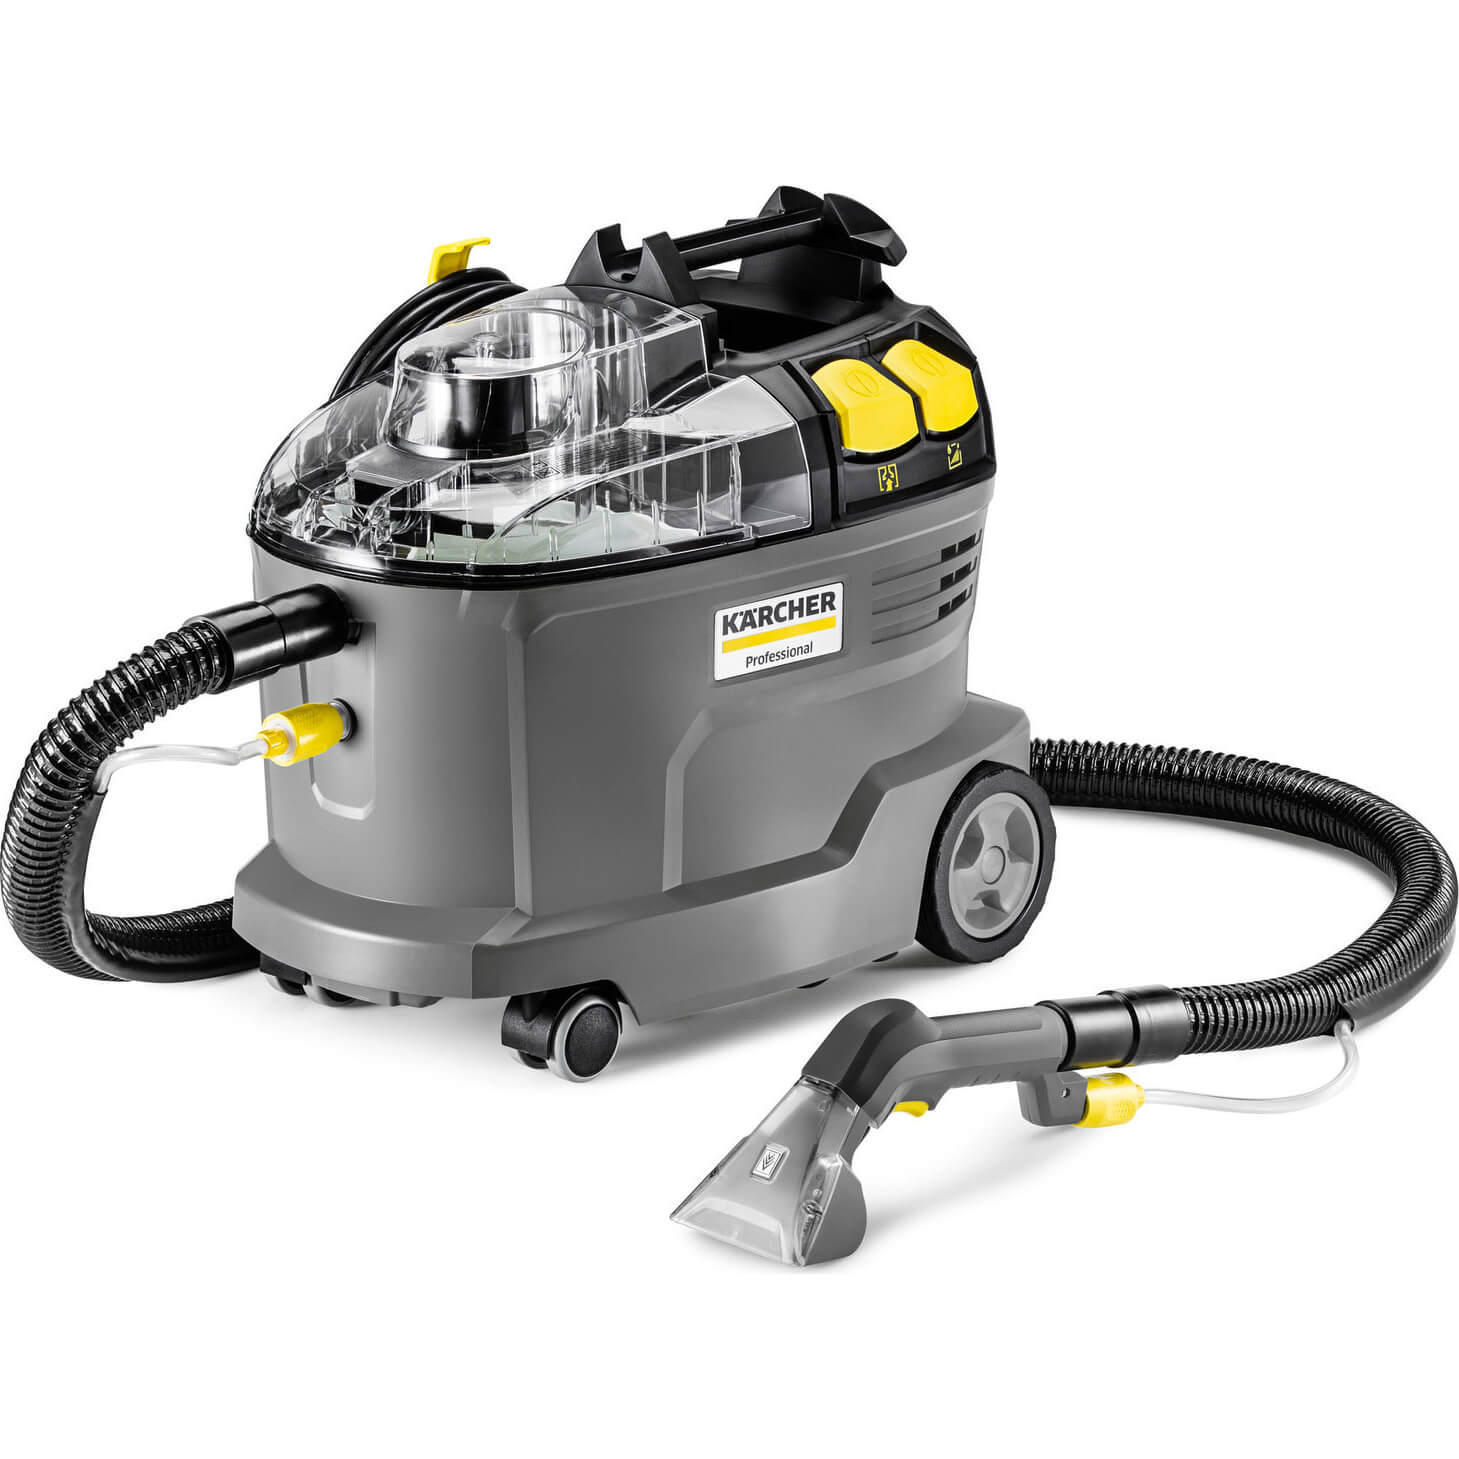 Image of Karcher PUZZI 8/1 C Professional Spot Carpet and Upholstery Cleaner 240v